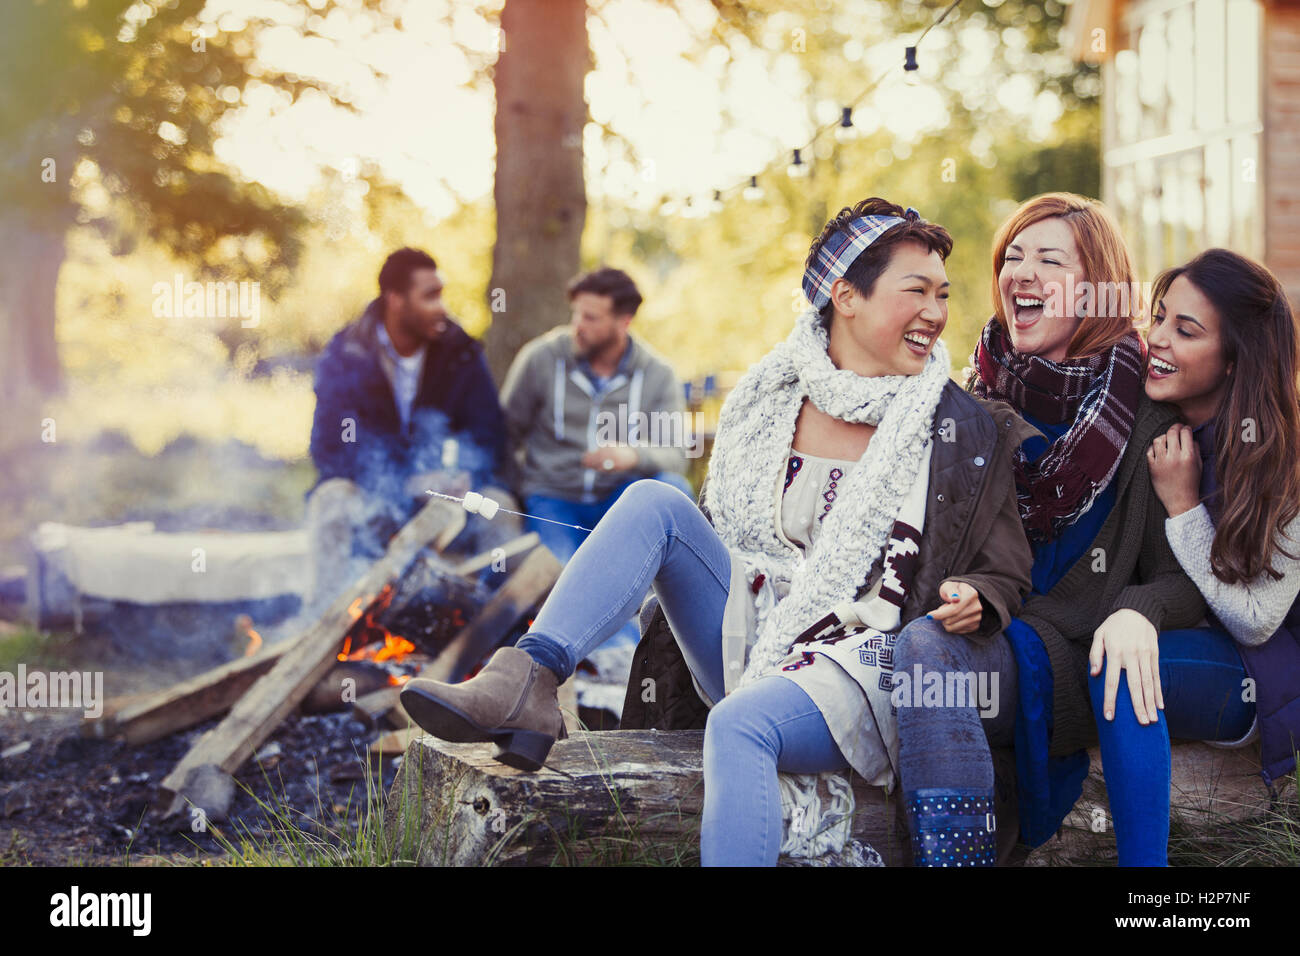 Female friends laughing and roasting marshmallows at campfire Stock Photo